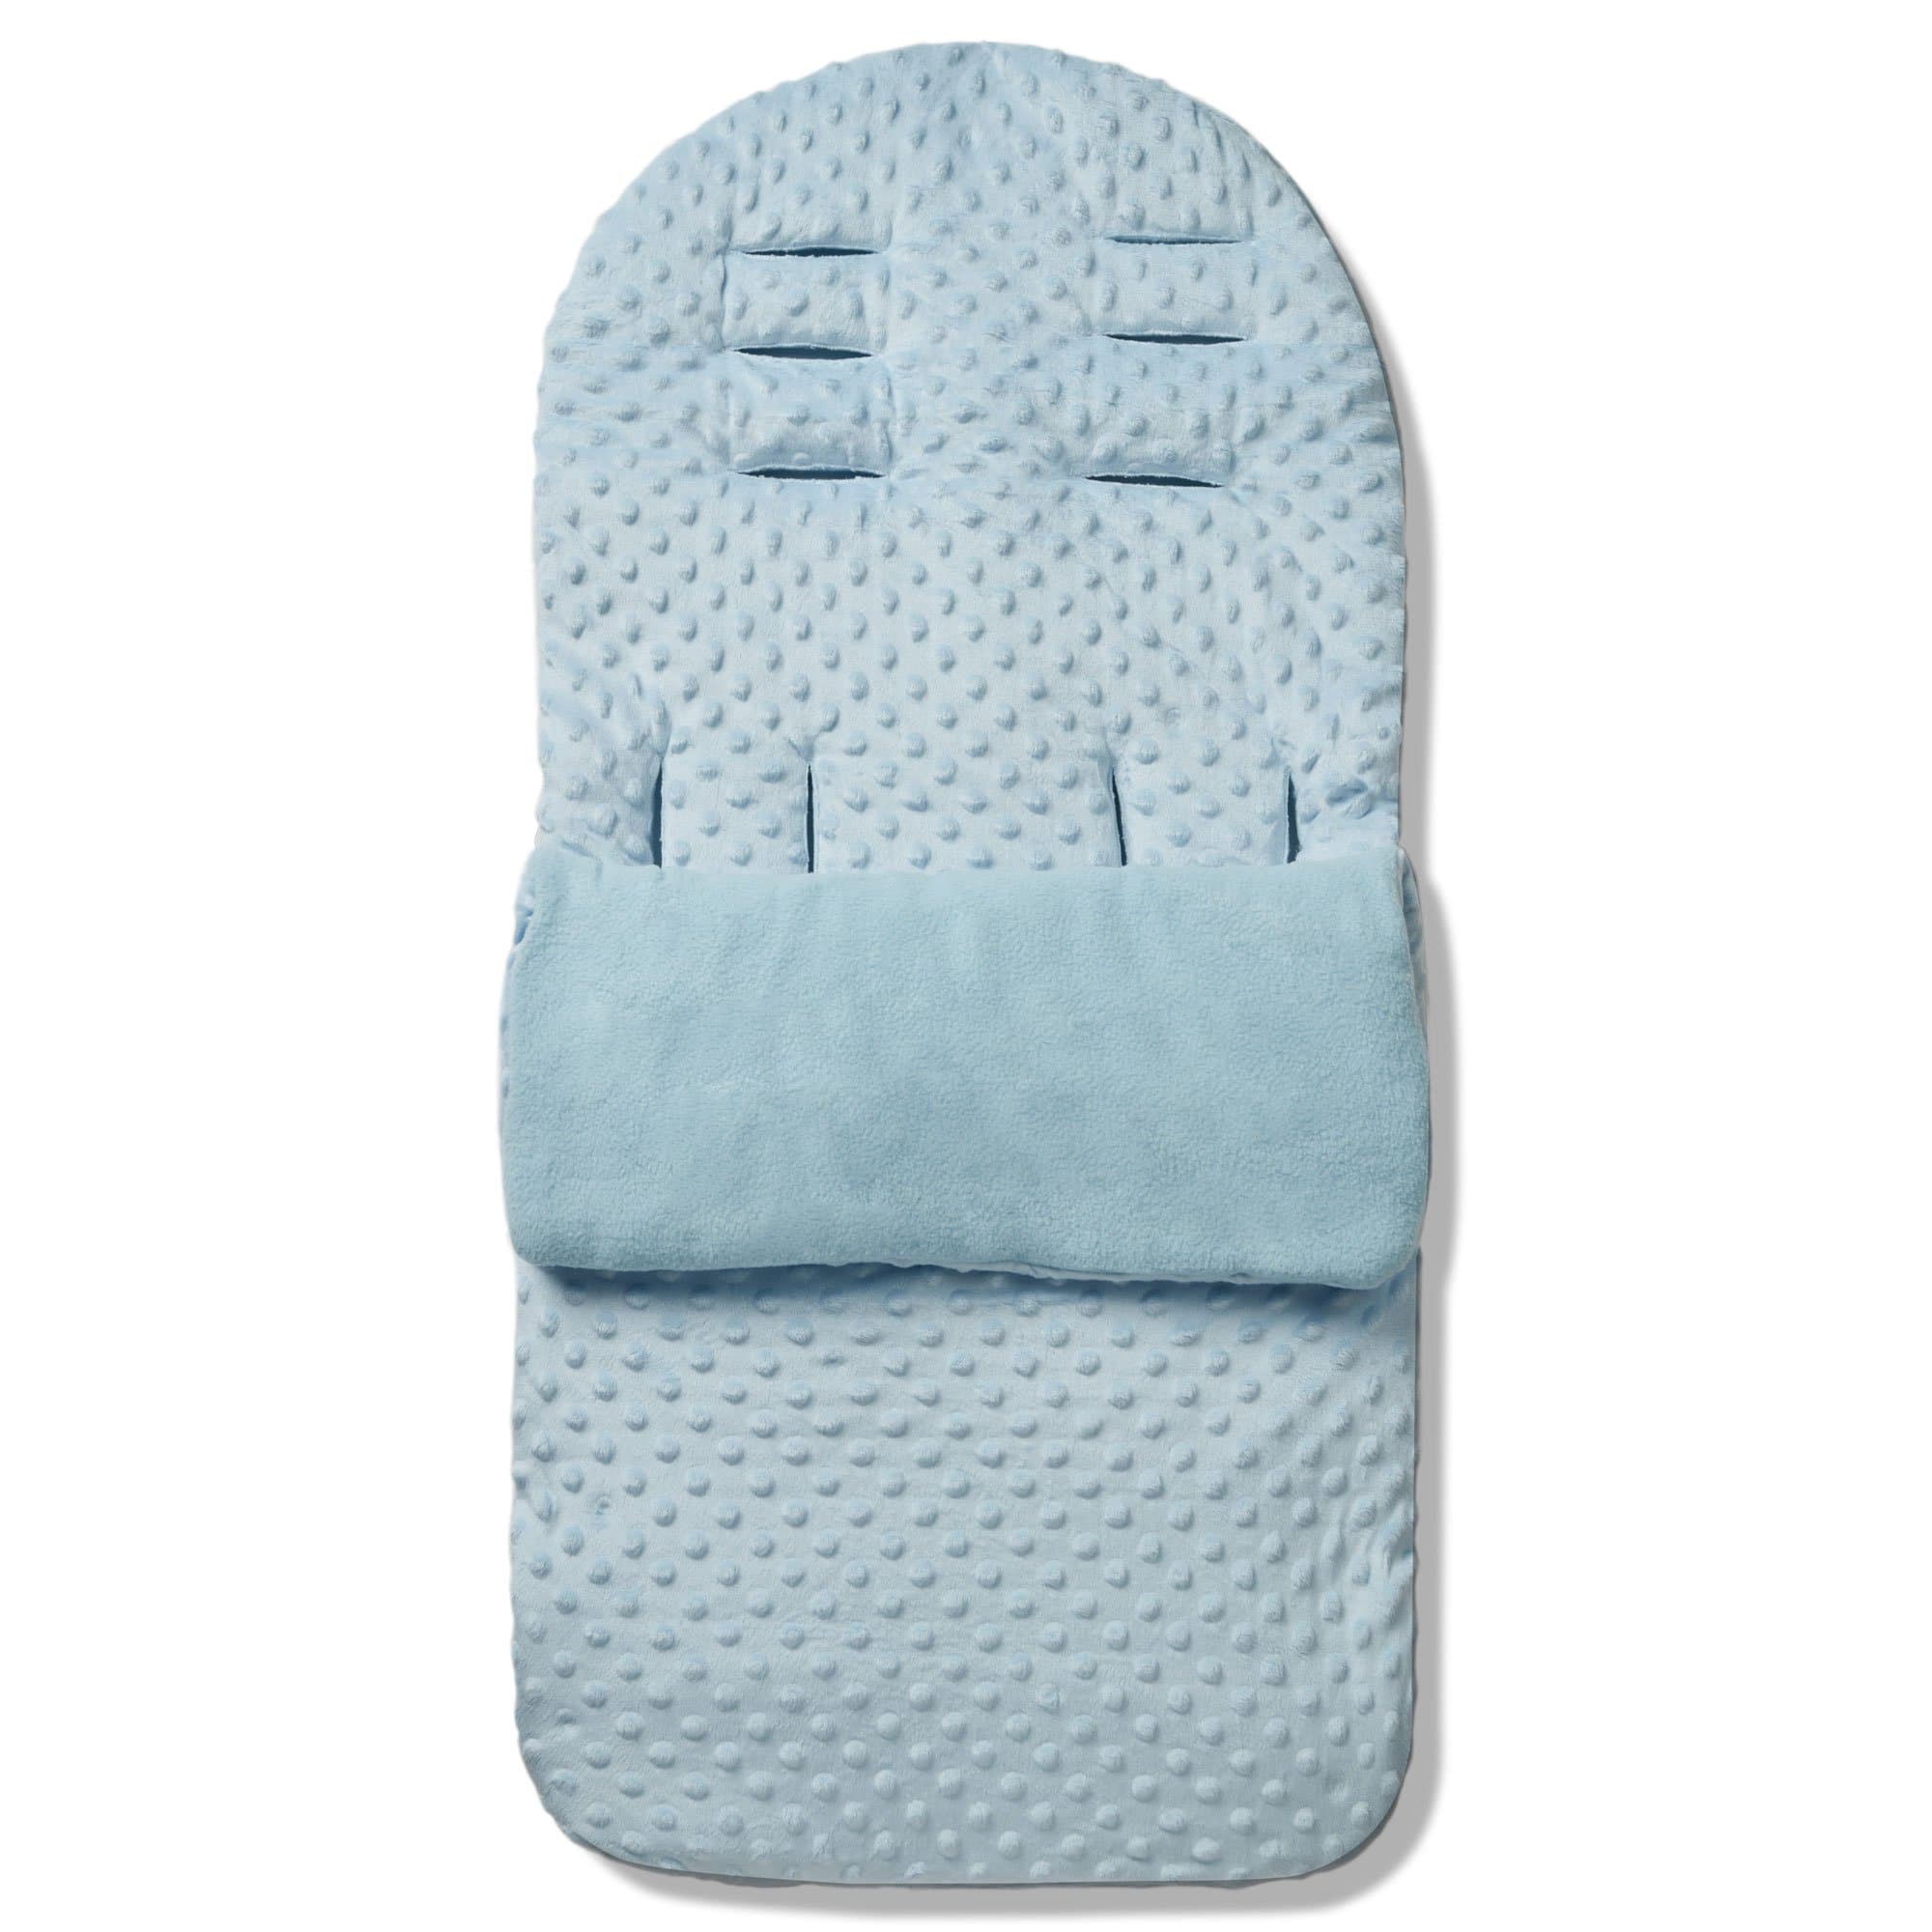 Universal Dimple Footmuff / Cosy Toes - Fits All Pushchairs / Prams & Buggies - For Your Little One